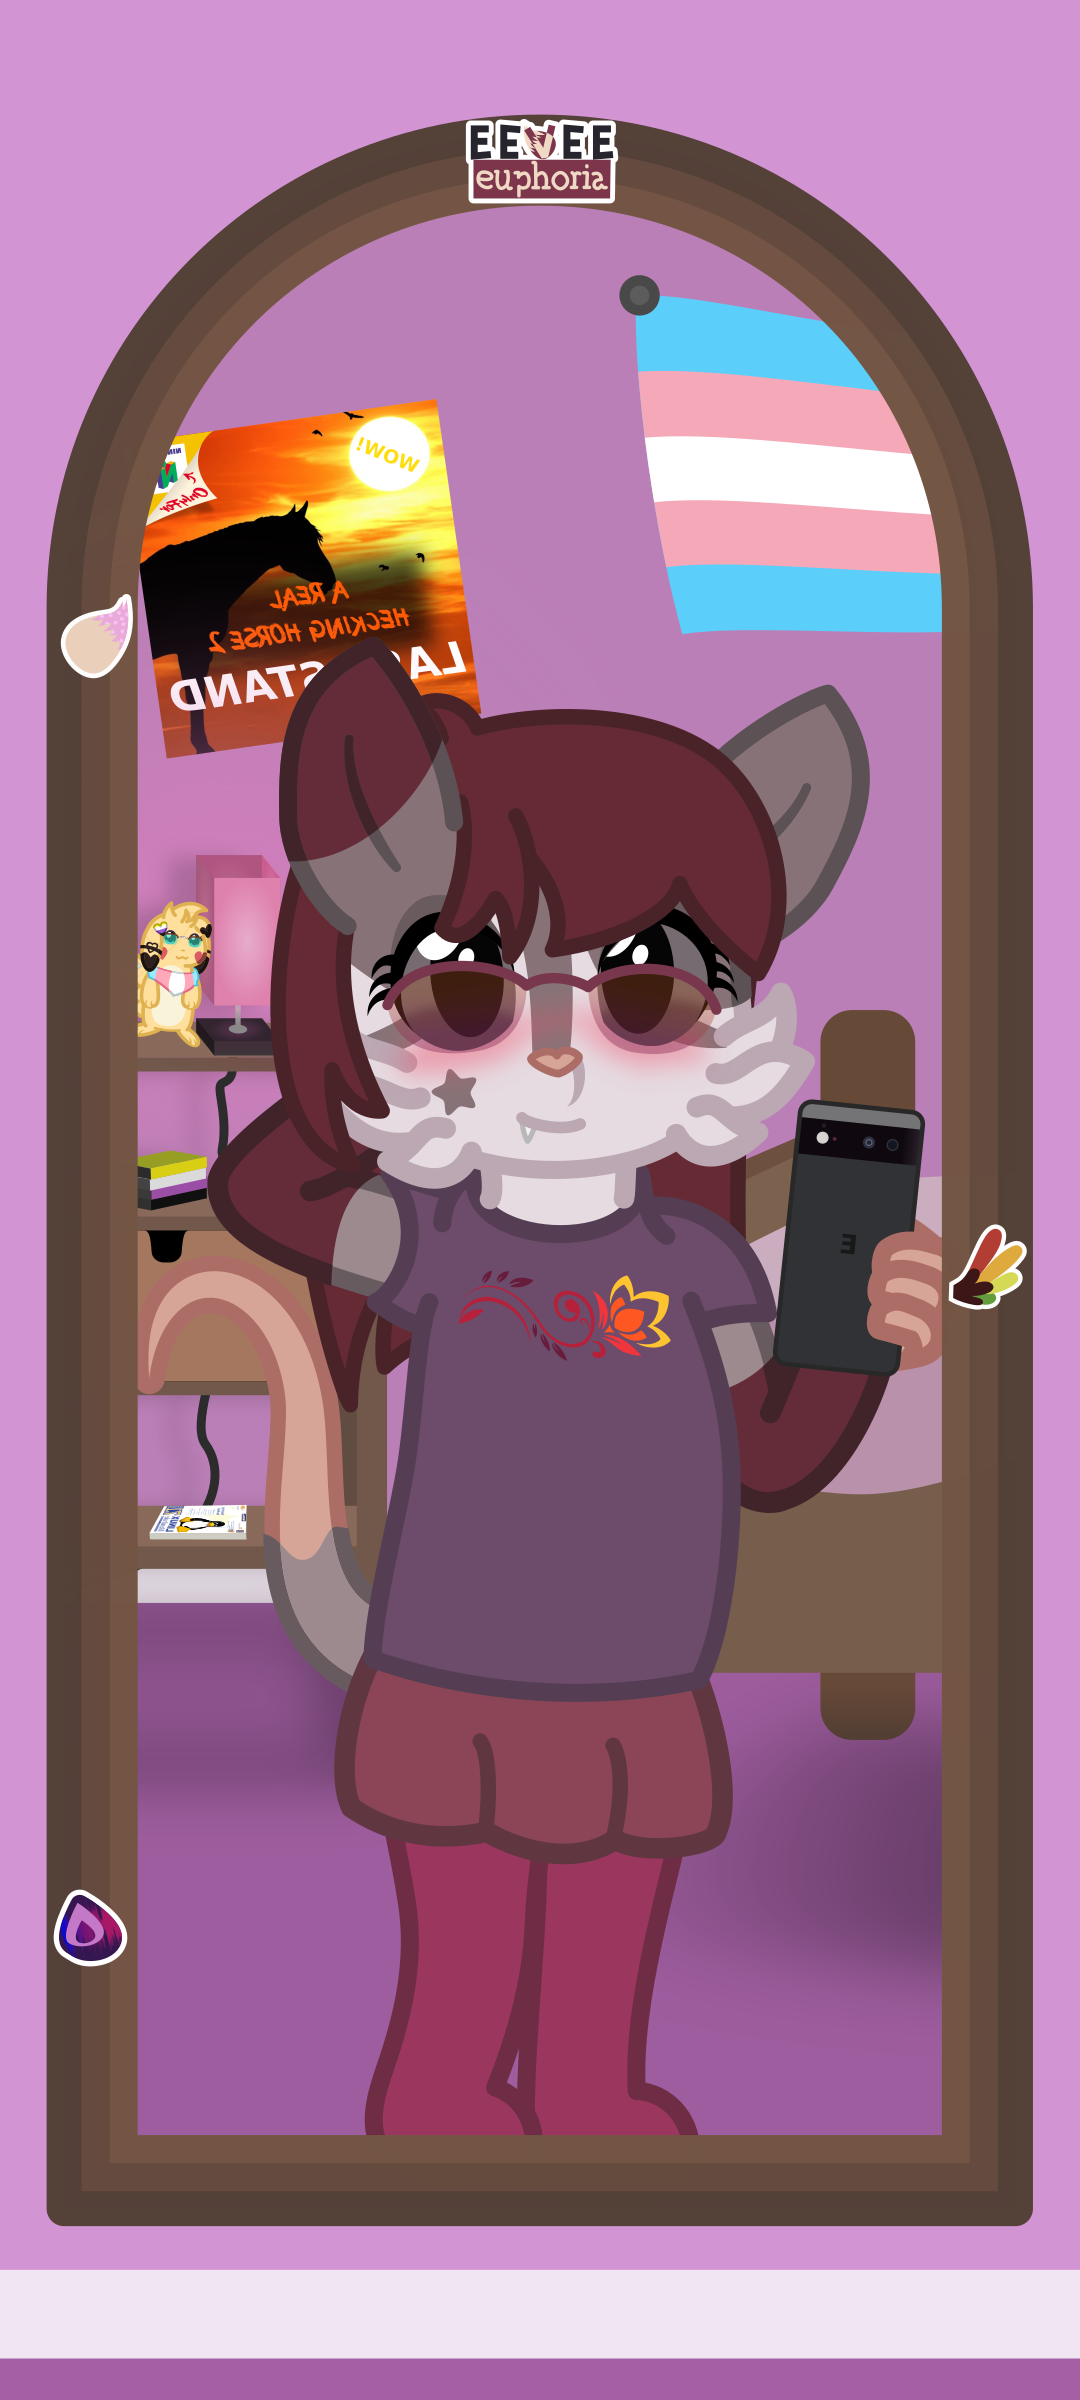 A gay possum is taking a selfie in the mirror, she's wearing red thigh-highs, a skirt, and a purple shirt with a red-to-yellow flower shirt